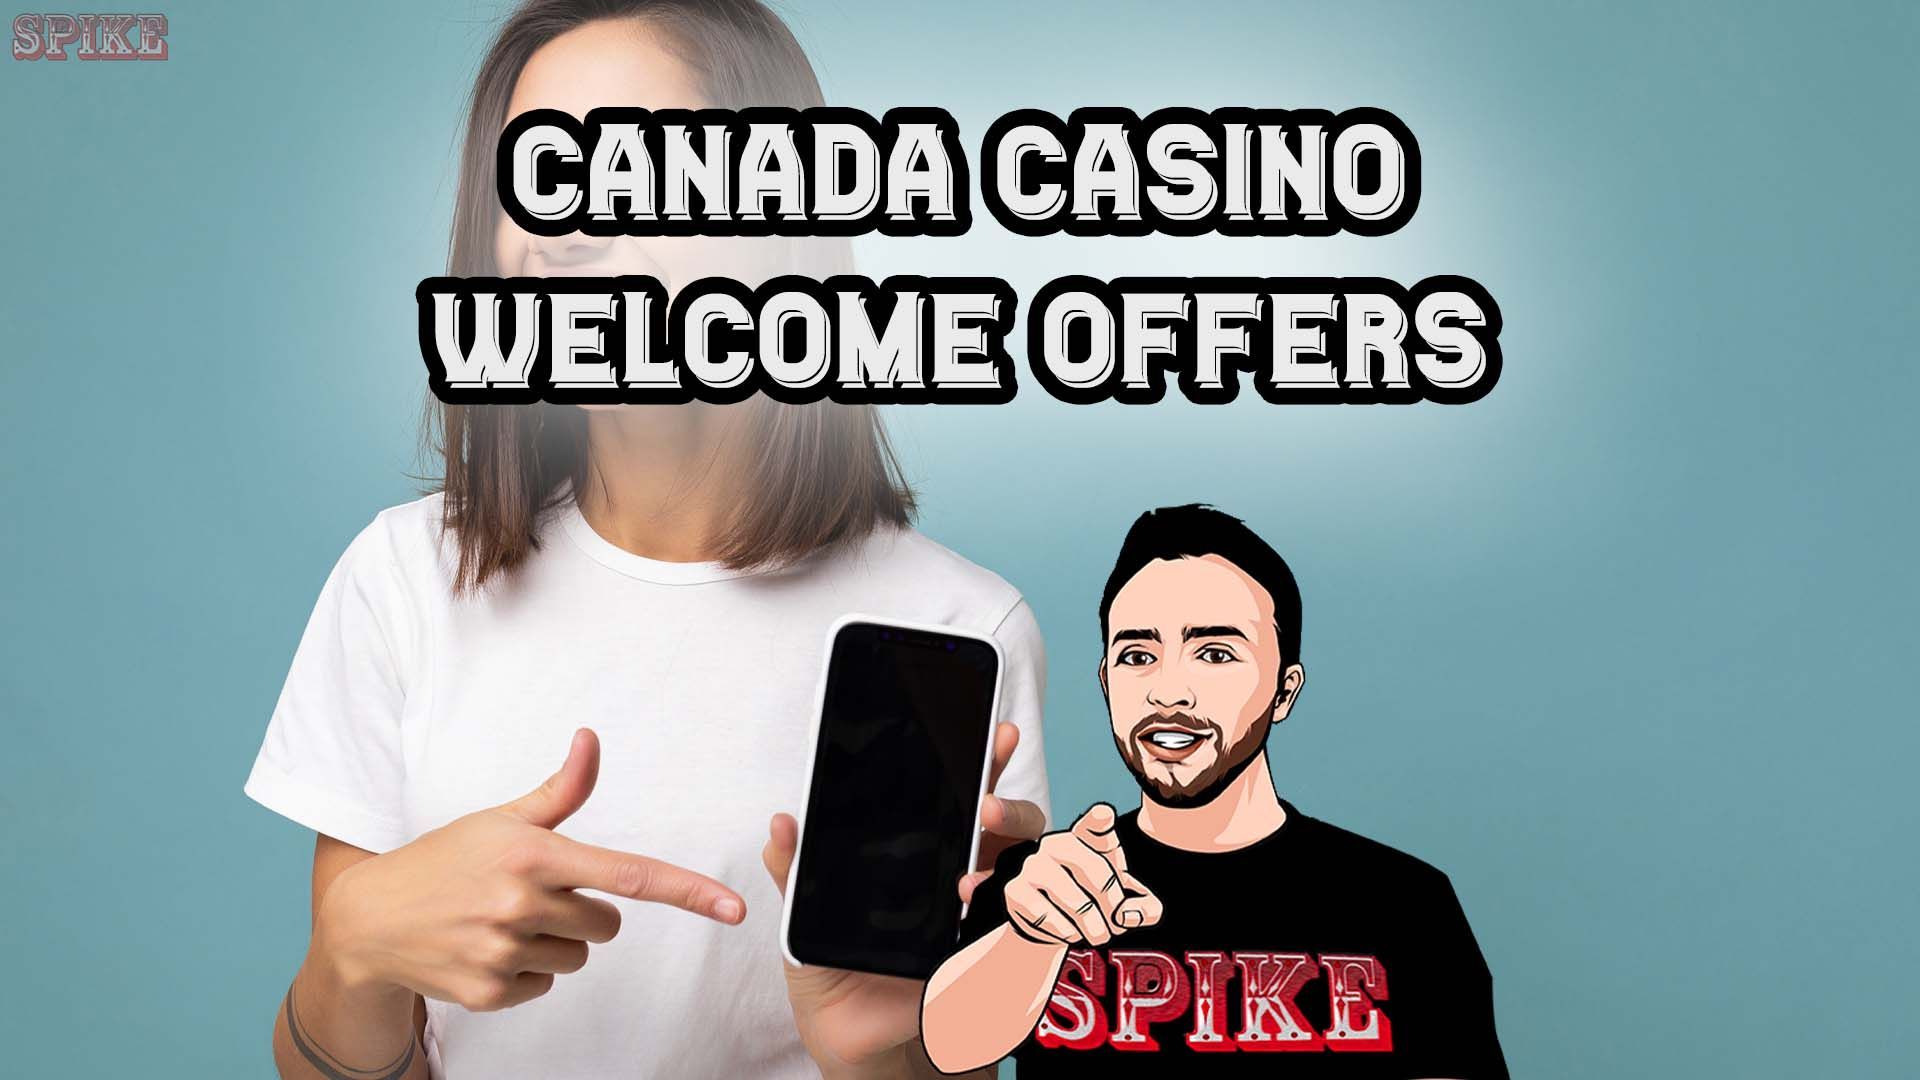 20 Myths About canada-casinos in 2021